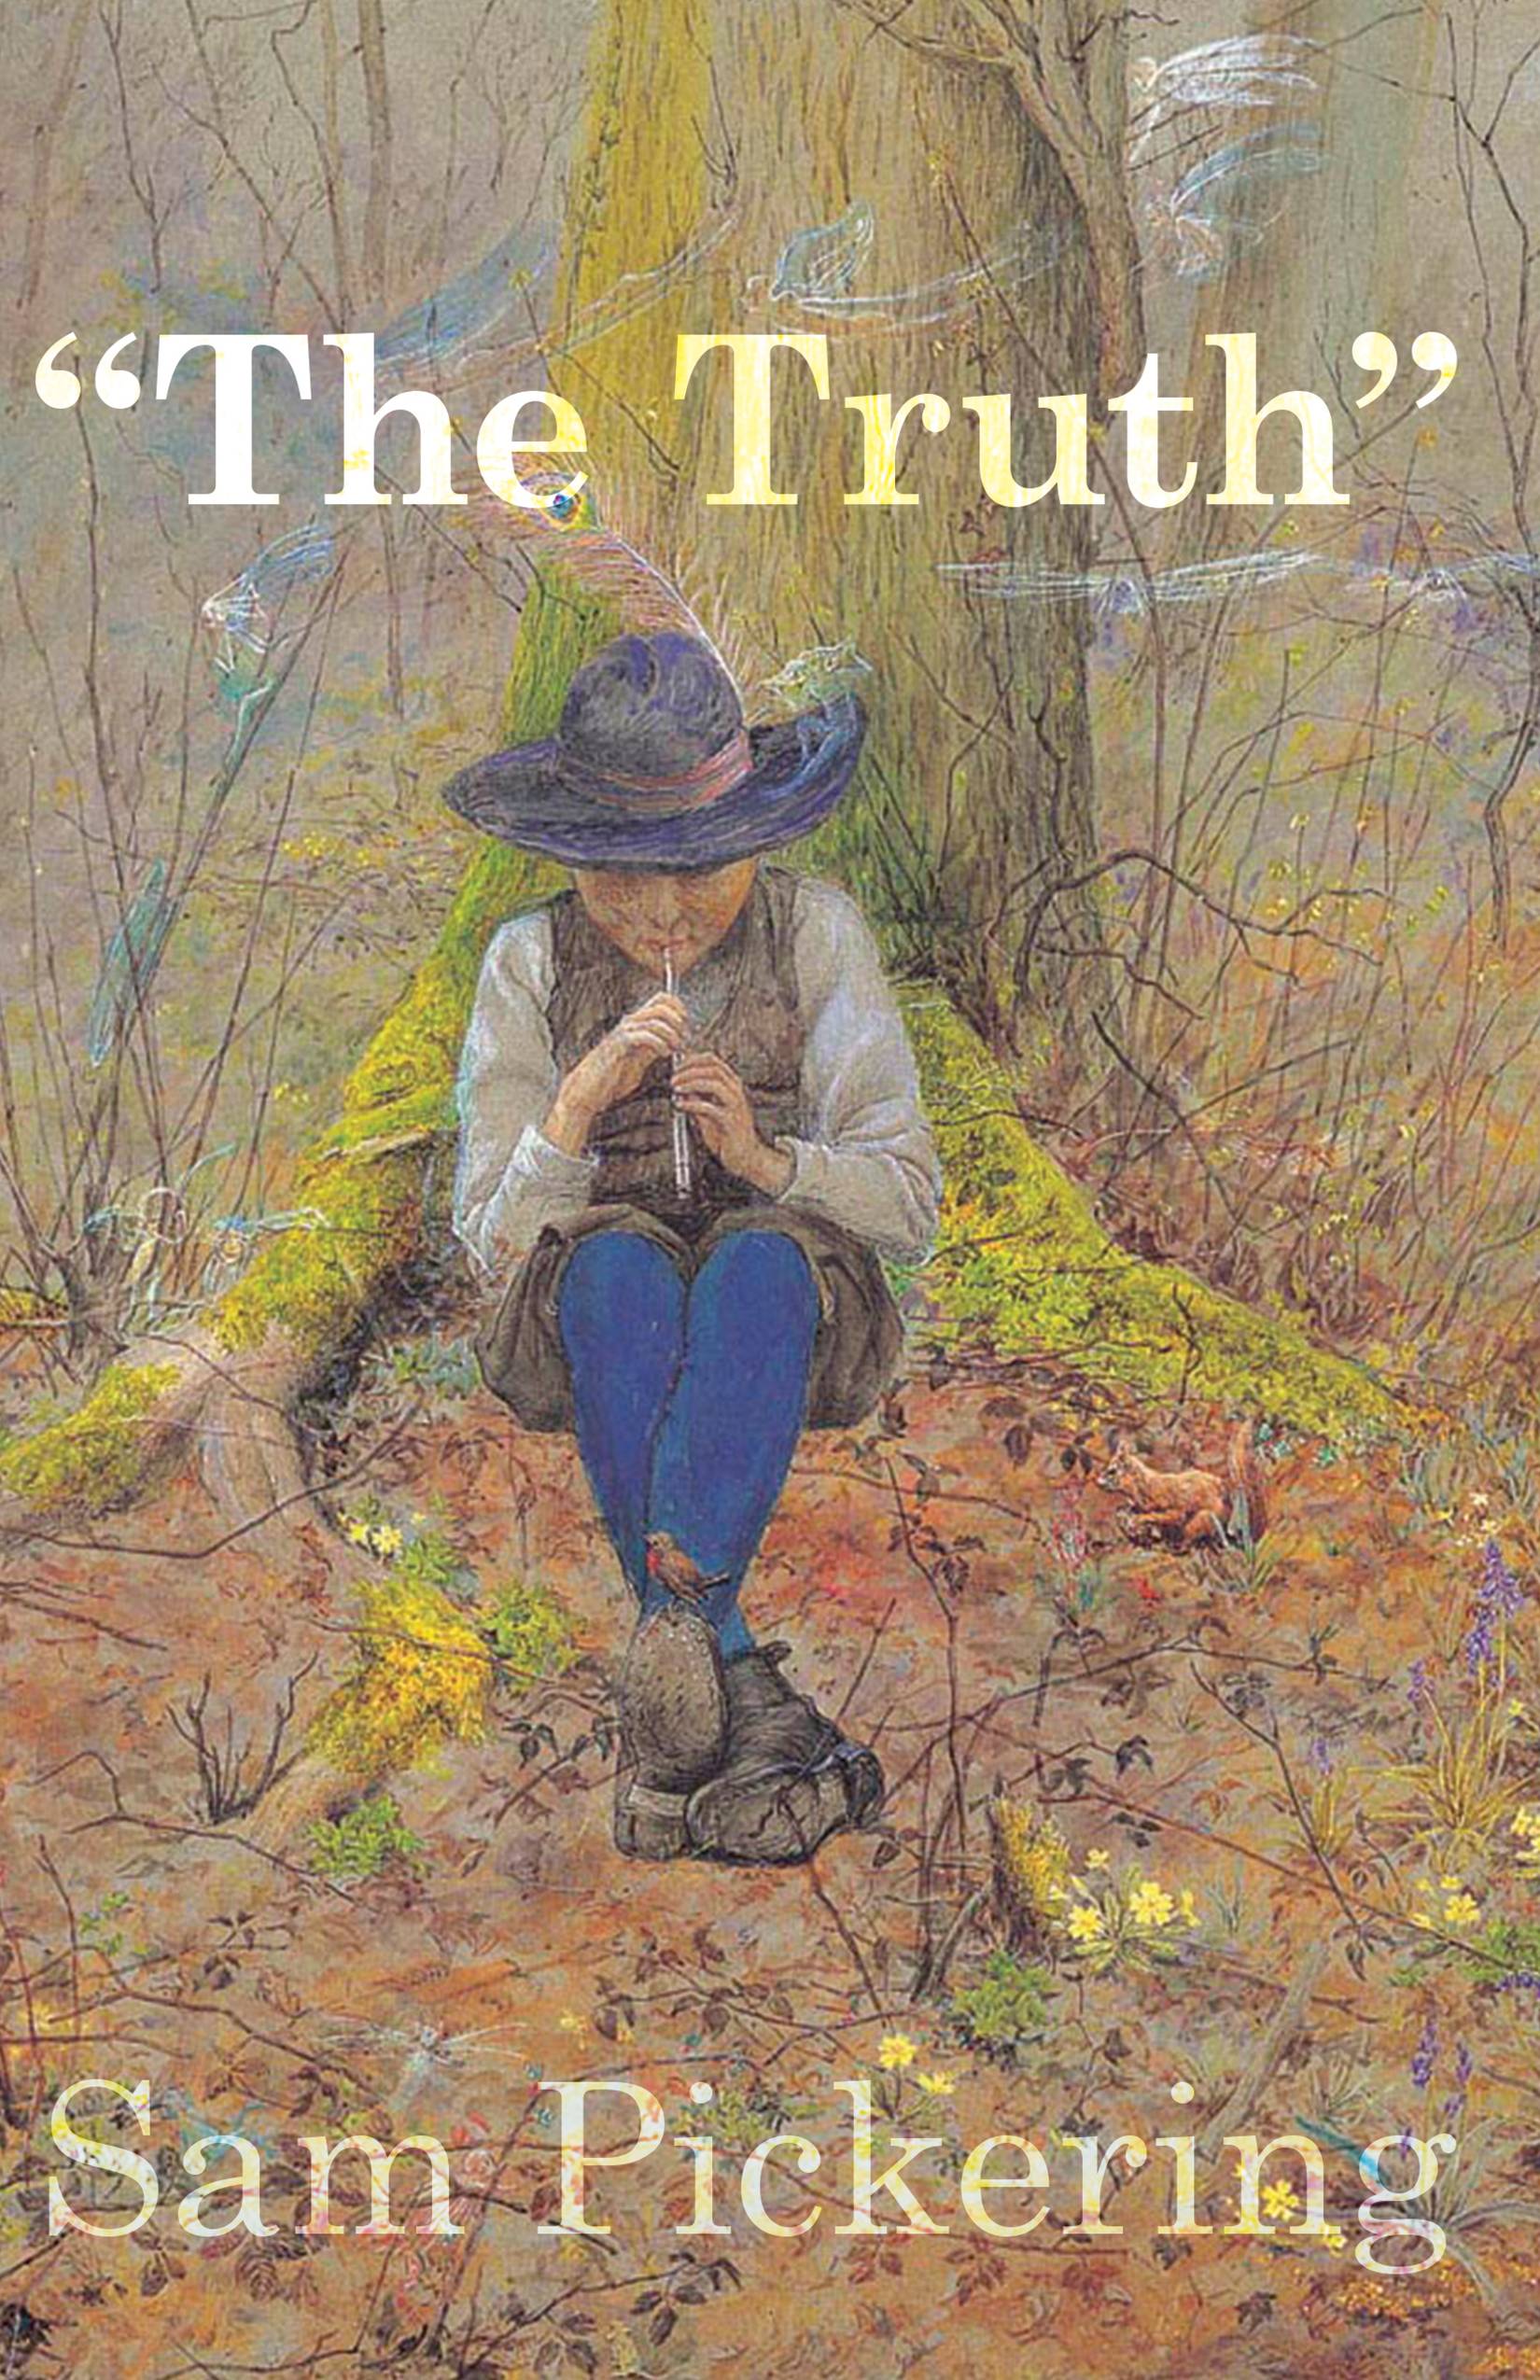 "The Truth" by Sam Pickering shows a painting of a man sitting beneath a tree with colorful leaves and flowers on the ground around him. The man is wearing a hat with a feather and playing a flute. He has on Dungarees and boots with ankles crossed at the knees.